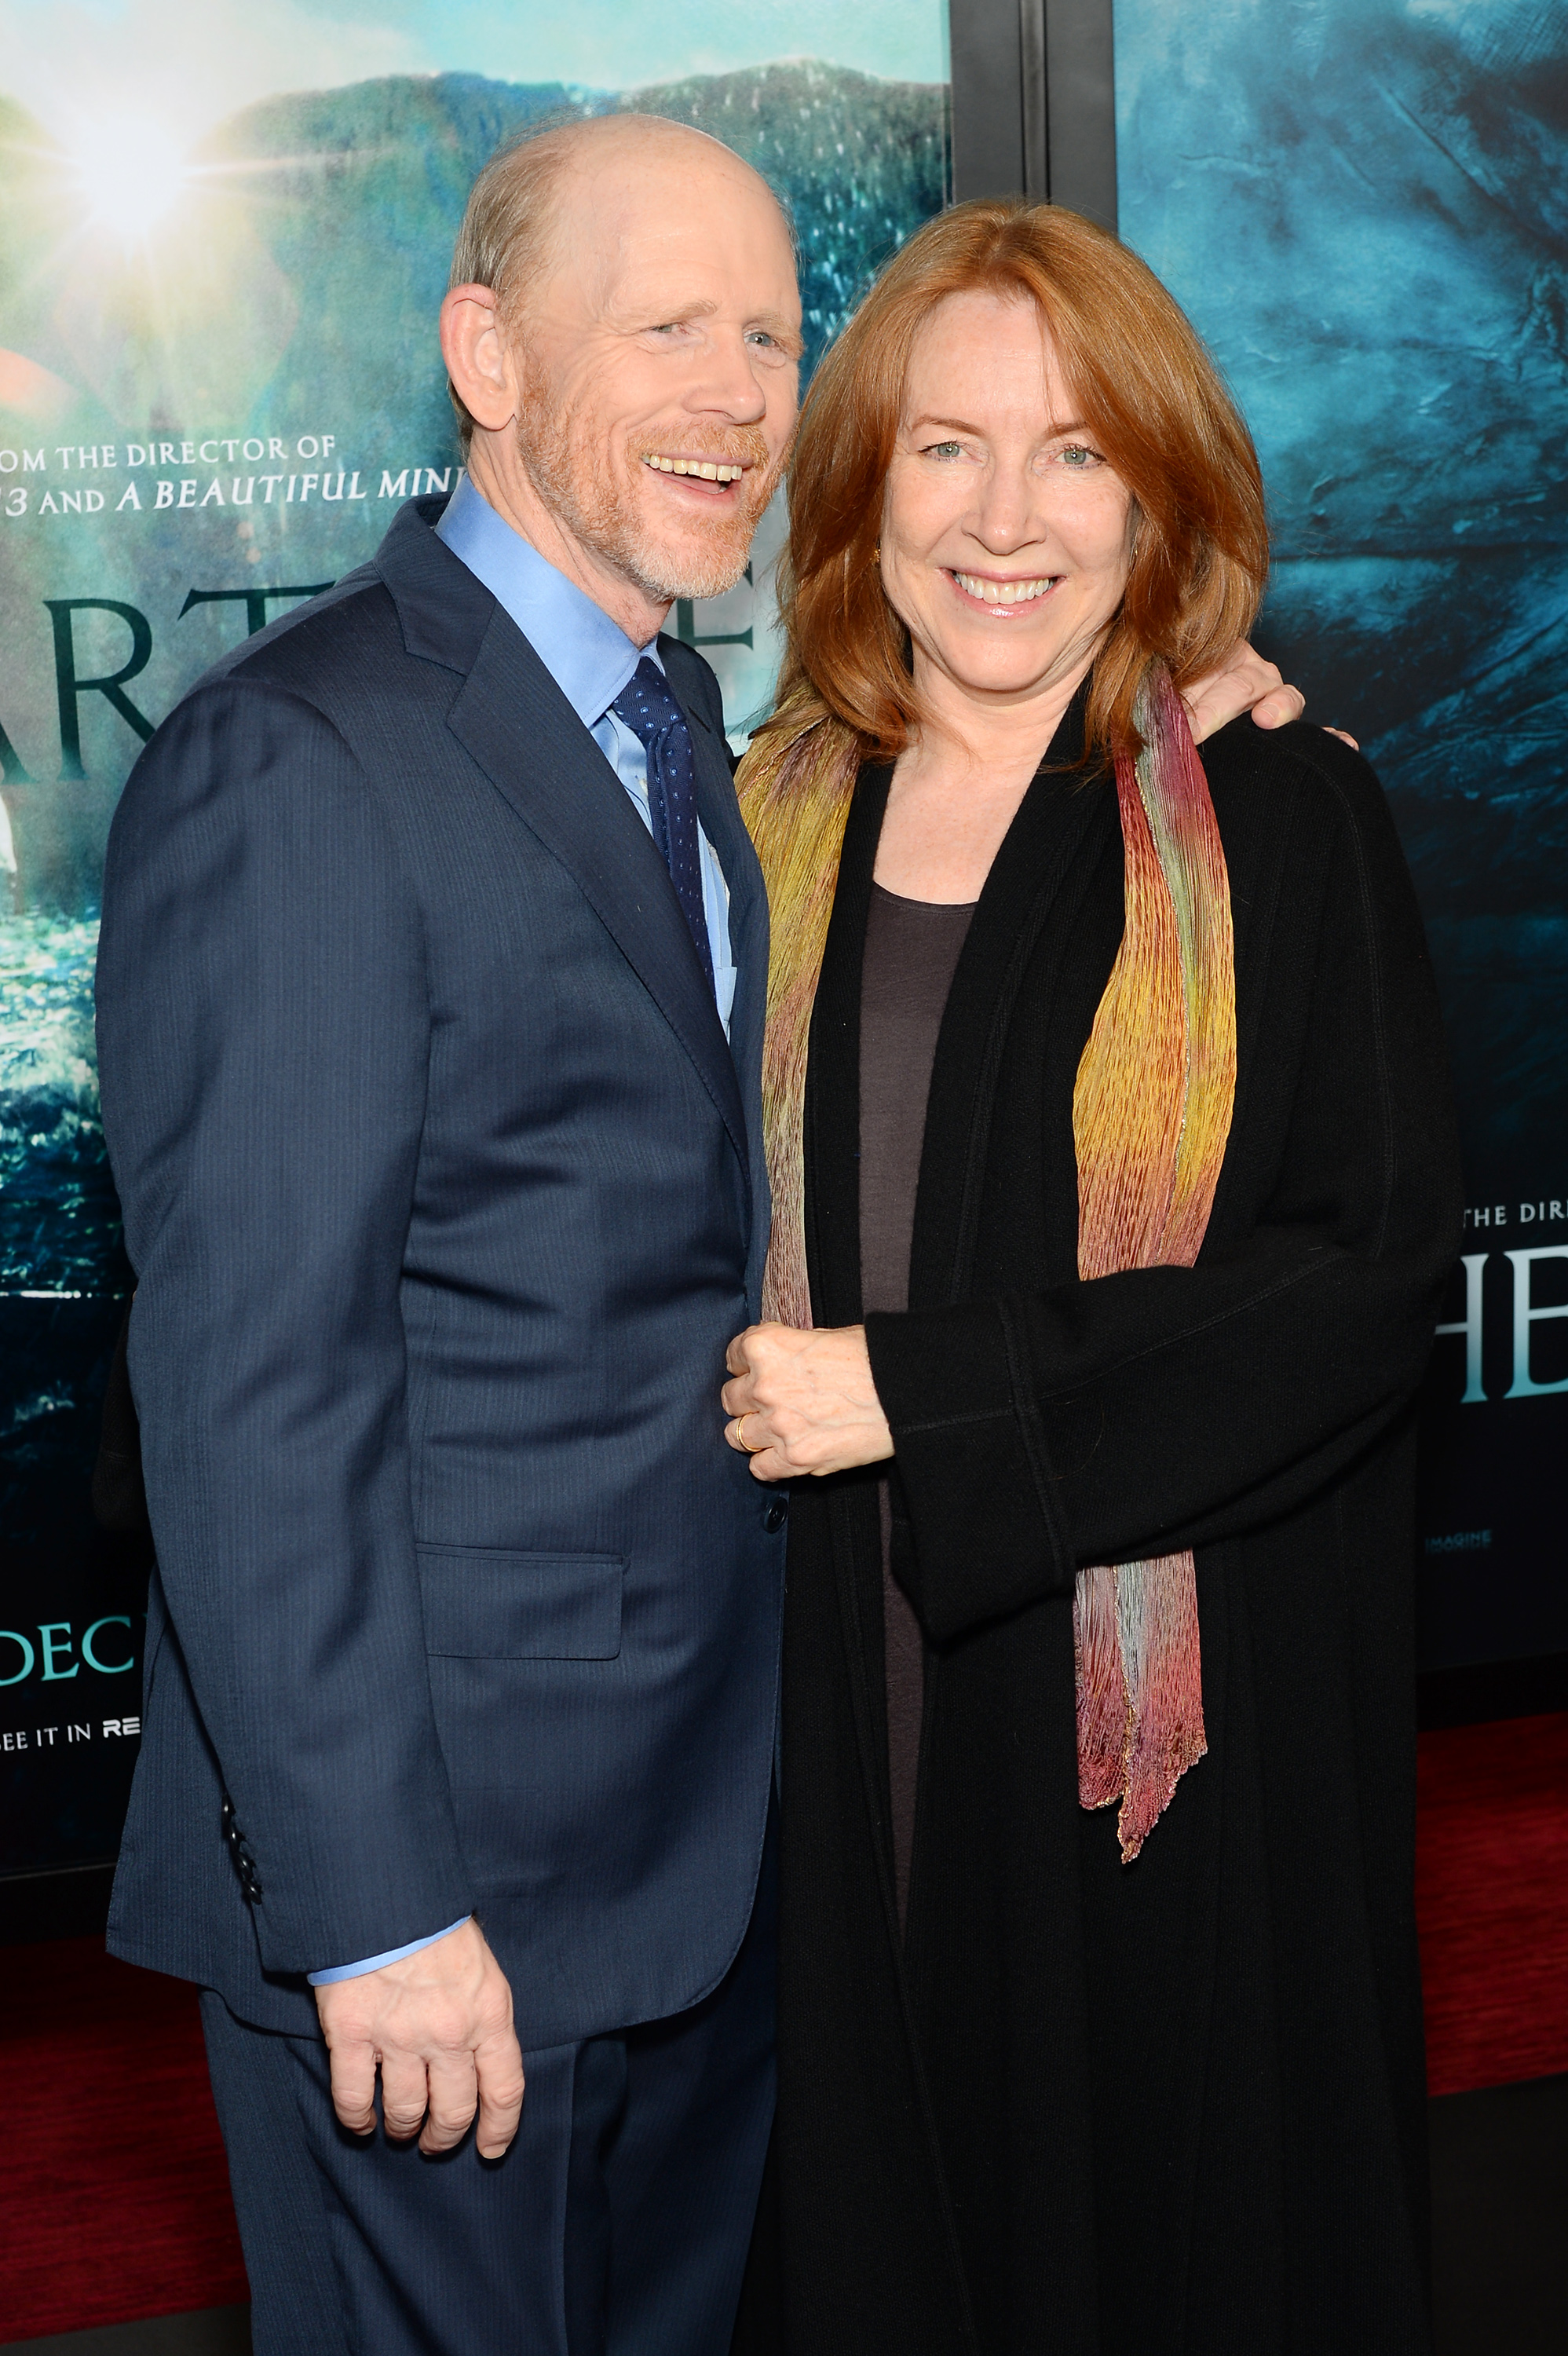 Ron and Cheryl Howard attend "In The Heart Of The Sea" premiere in New York City, on December 7, 2015. | Source: Getty Images